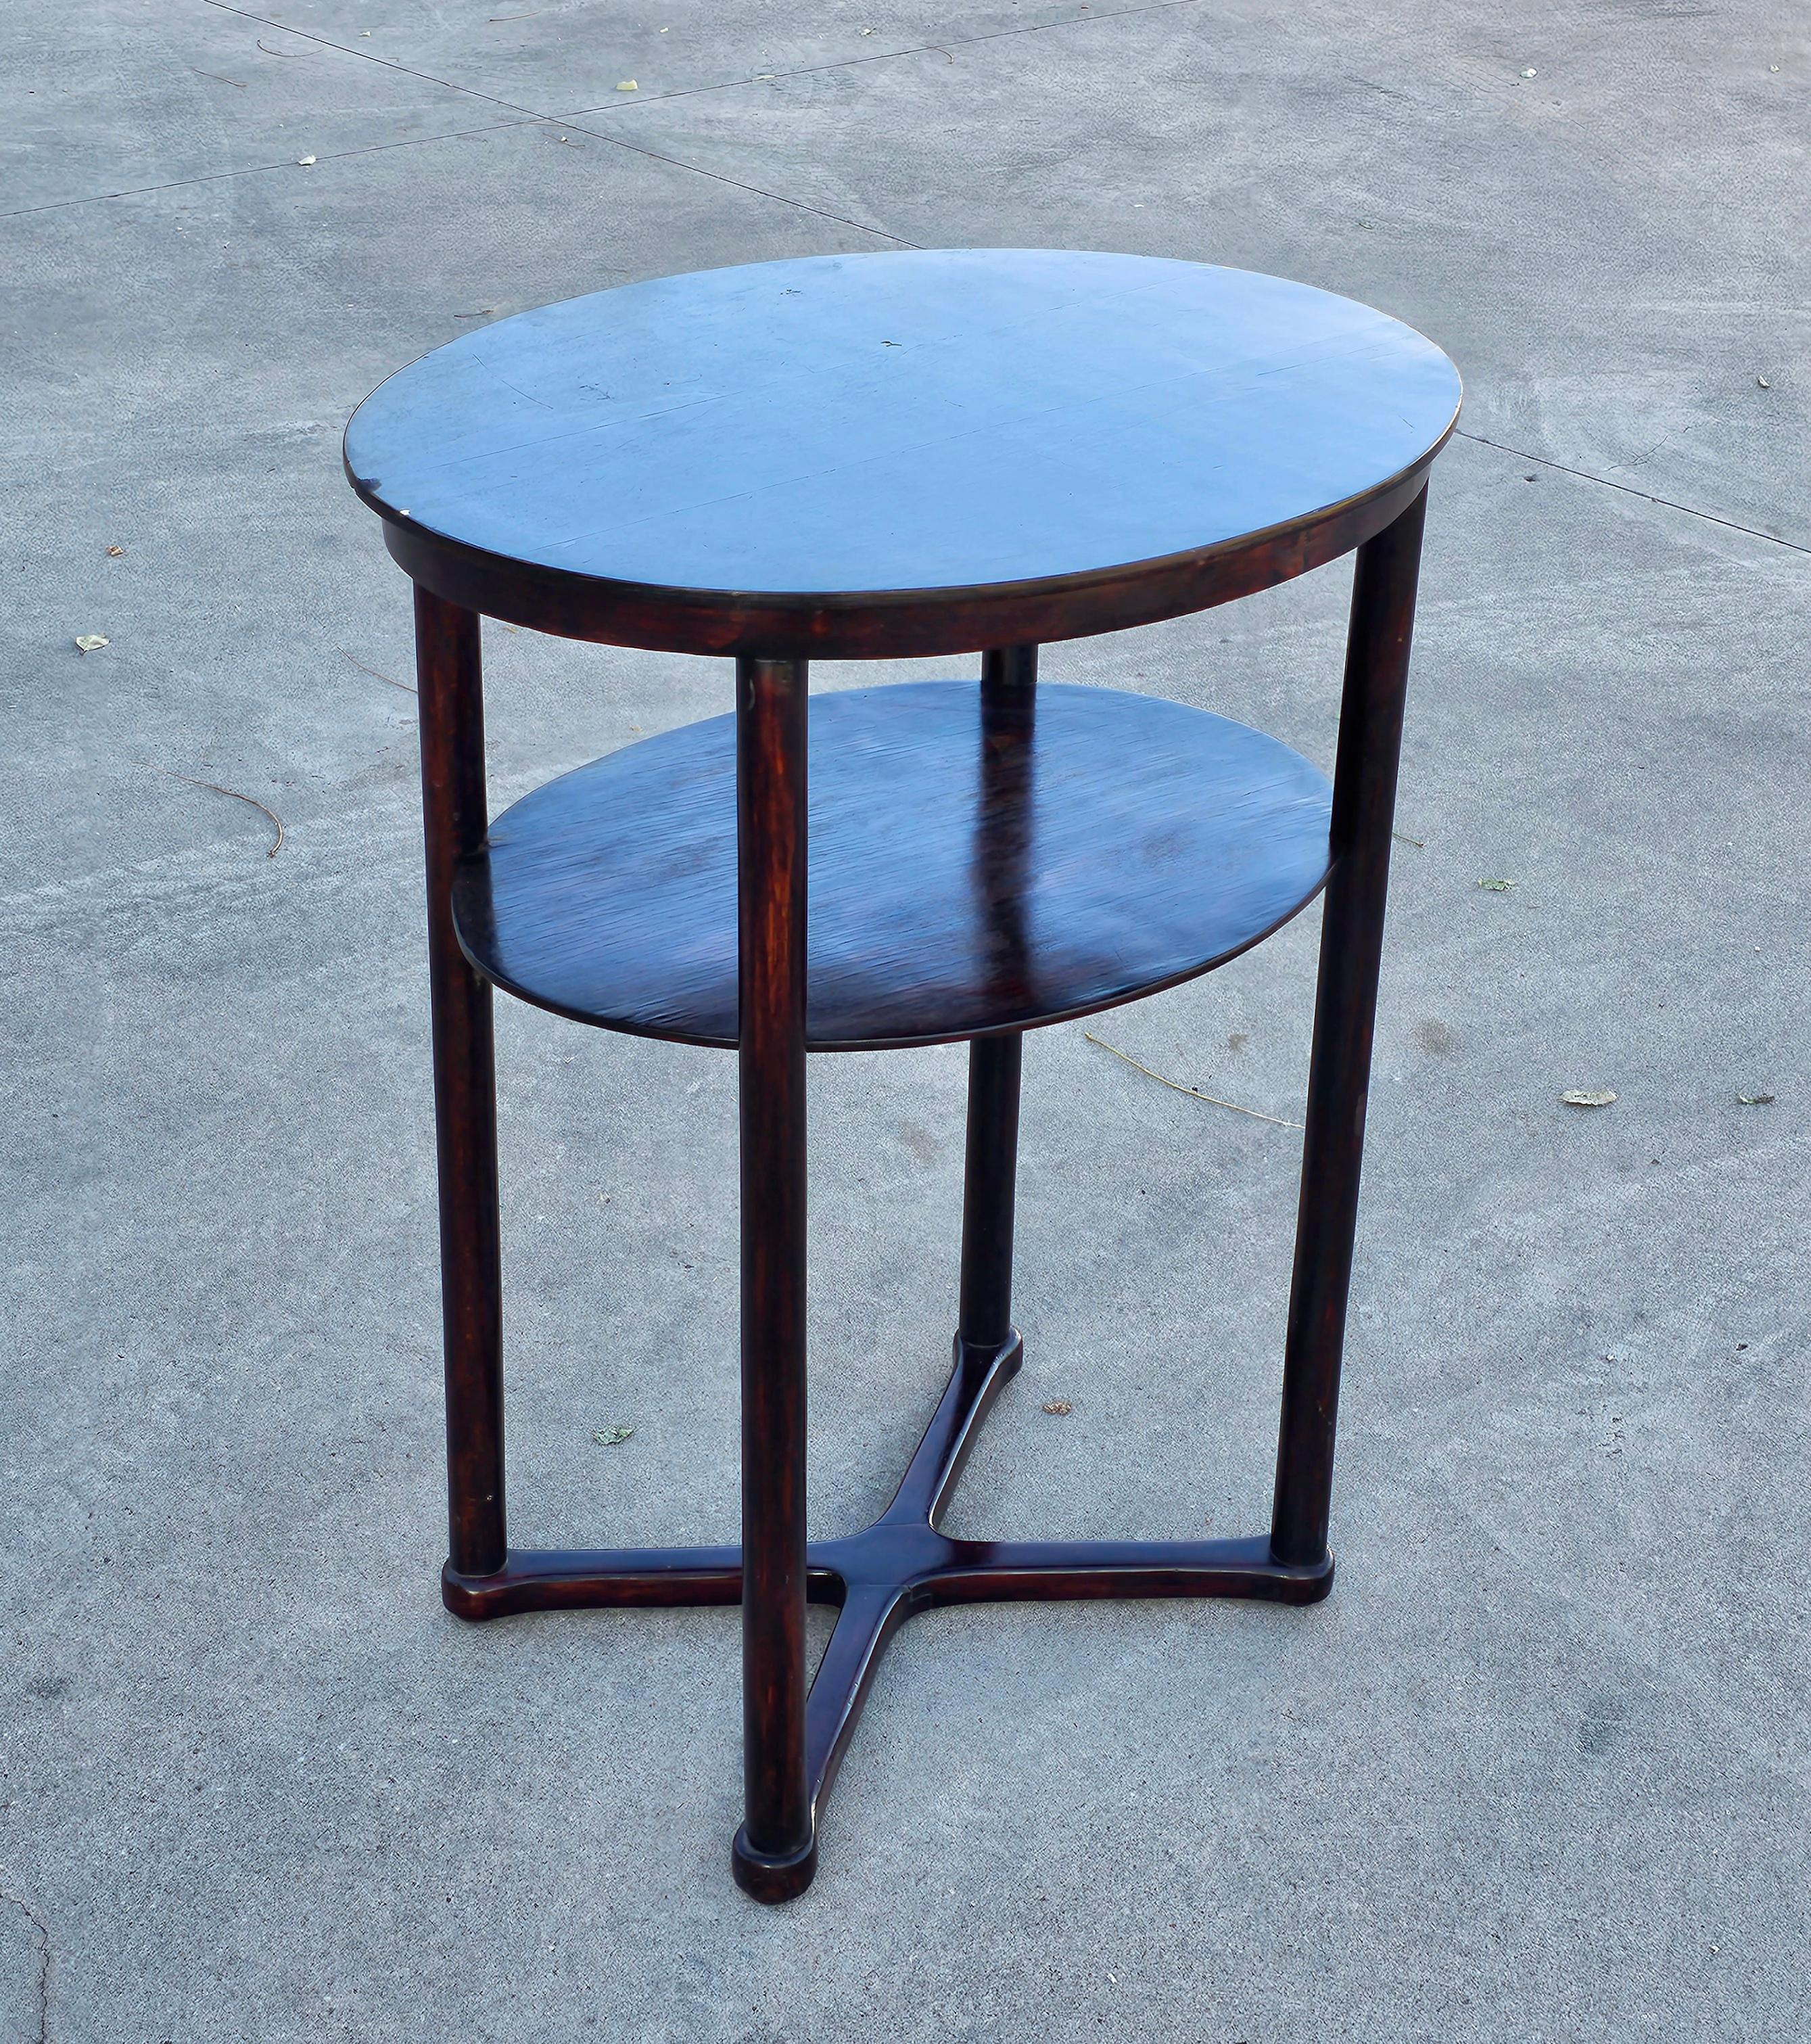 Early 20th Century Vienna Secession Oval Side Table Model 960/2 designed by Josef Hoffmann, 1910s For Sale